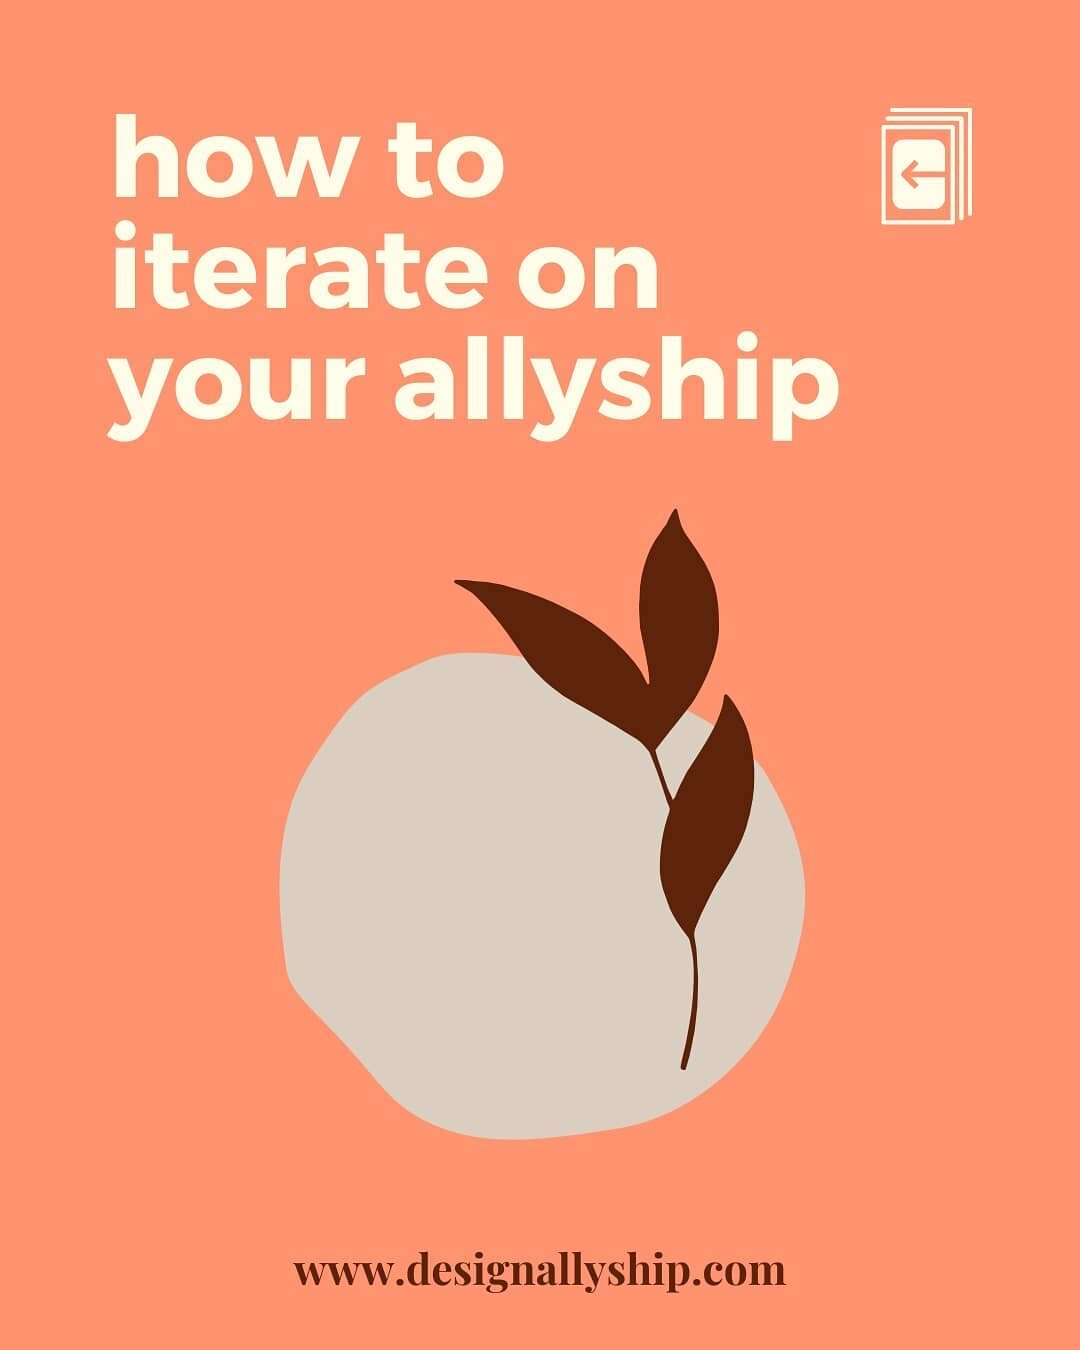 Allyship is an ongoing journey of betterment and self-growth. With that in mind, here's your daily reminder to iterate on your allyship and grow your skills! Committing to growth is solidarity in practice 🌱

You can build your ally skillset by check